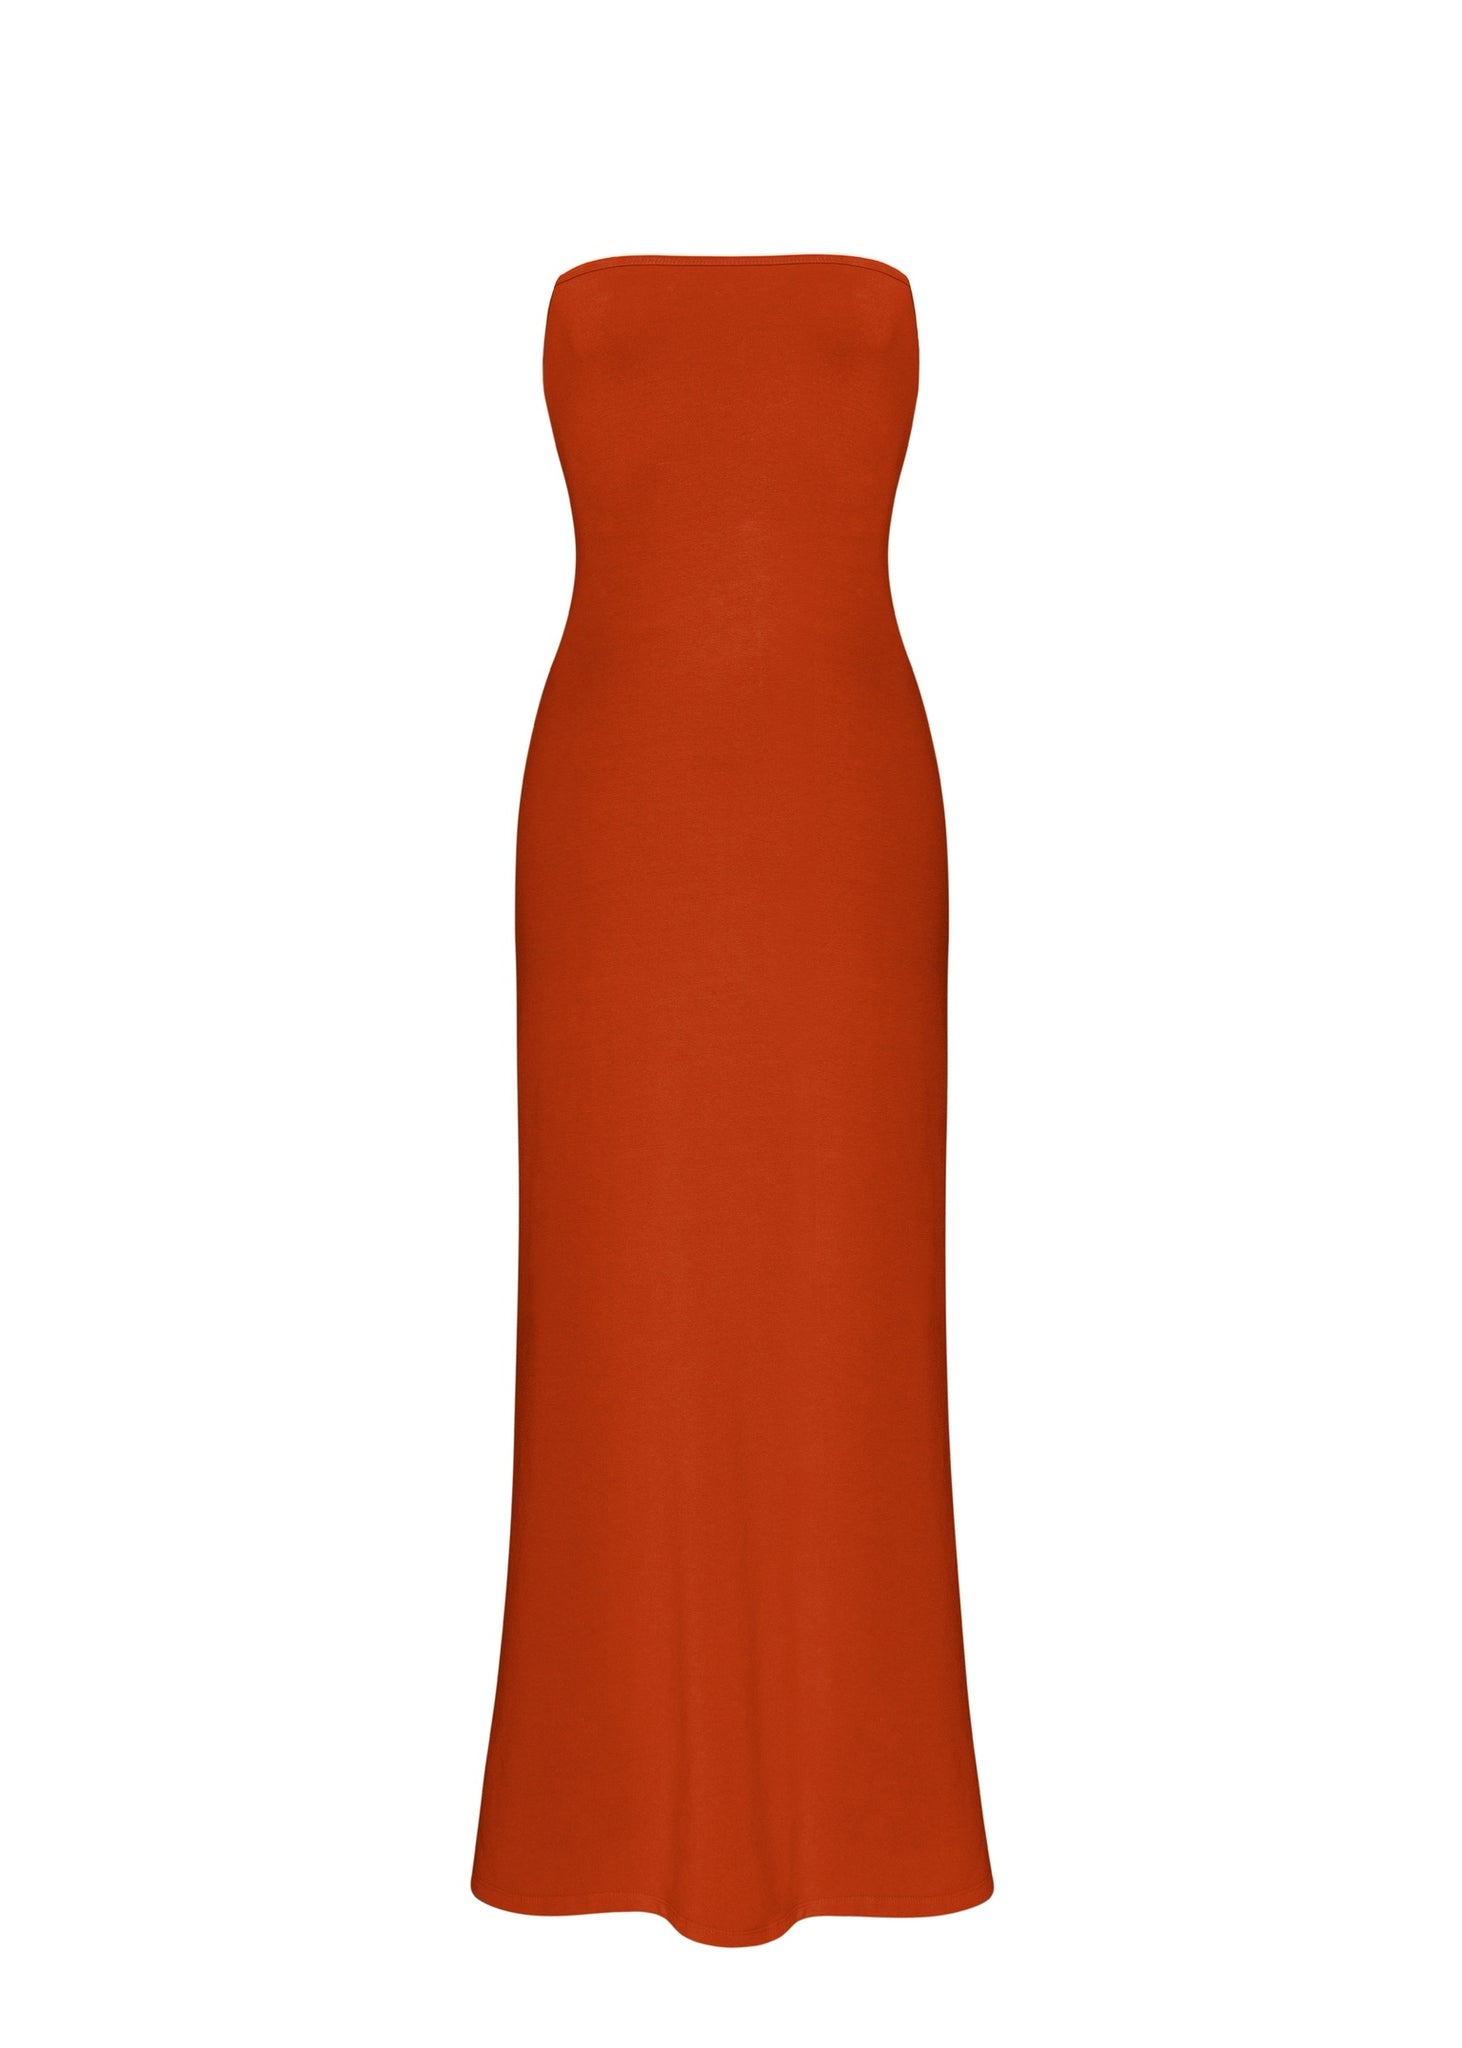 Wolford Fatal Dress in Red